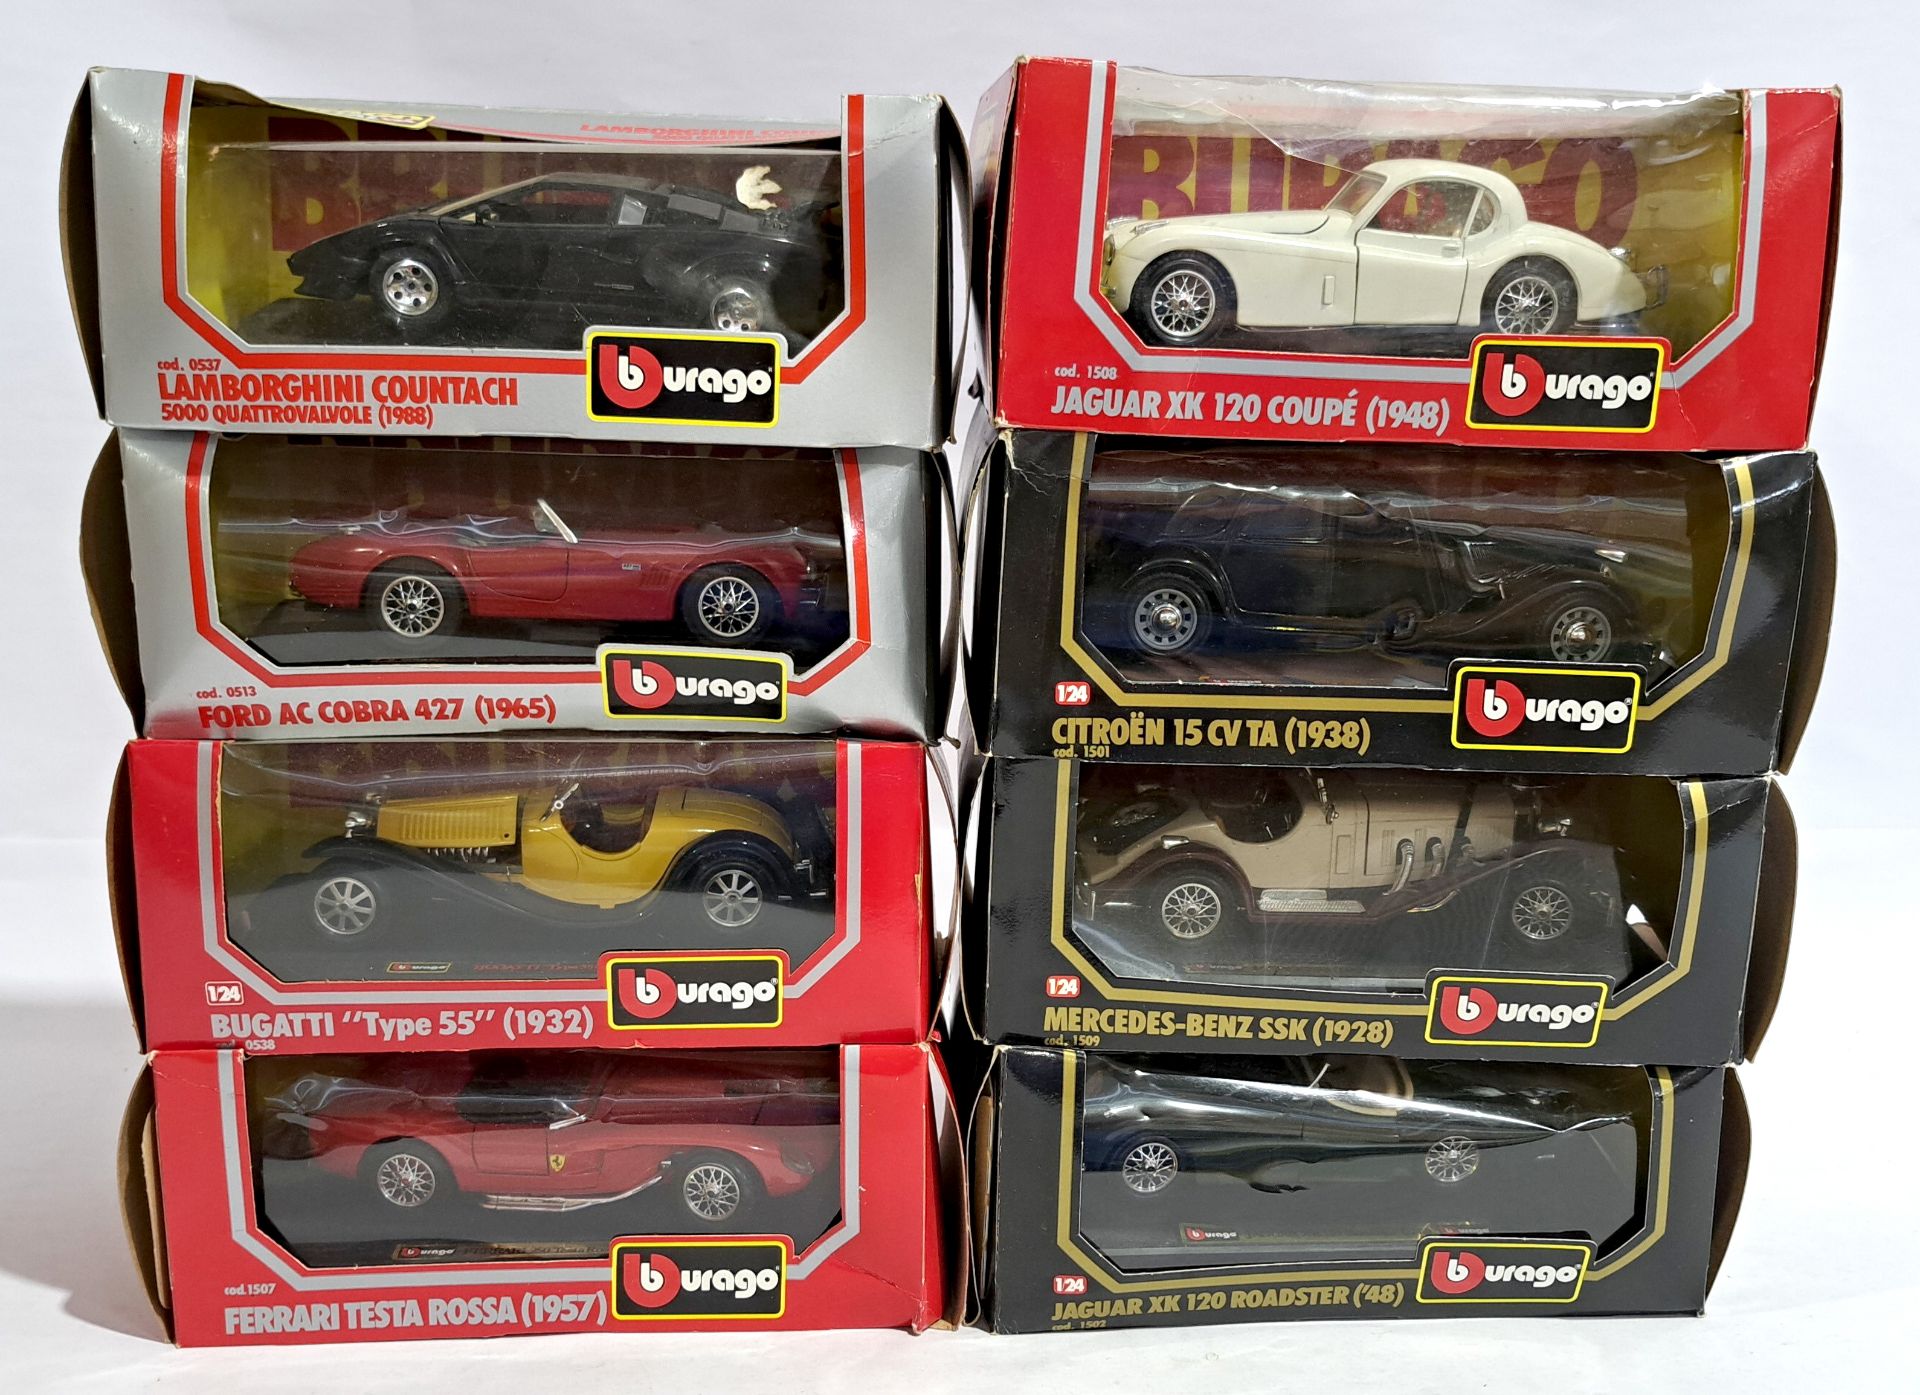 Bburago 1:24 scale, a boxed group of cars